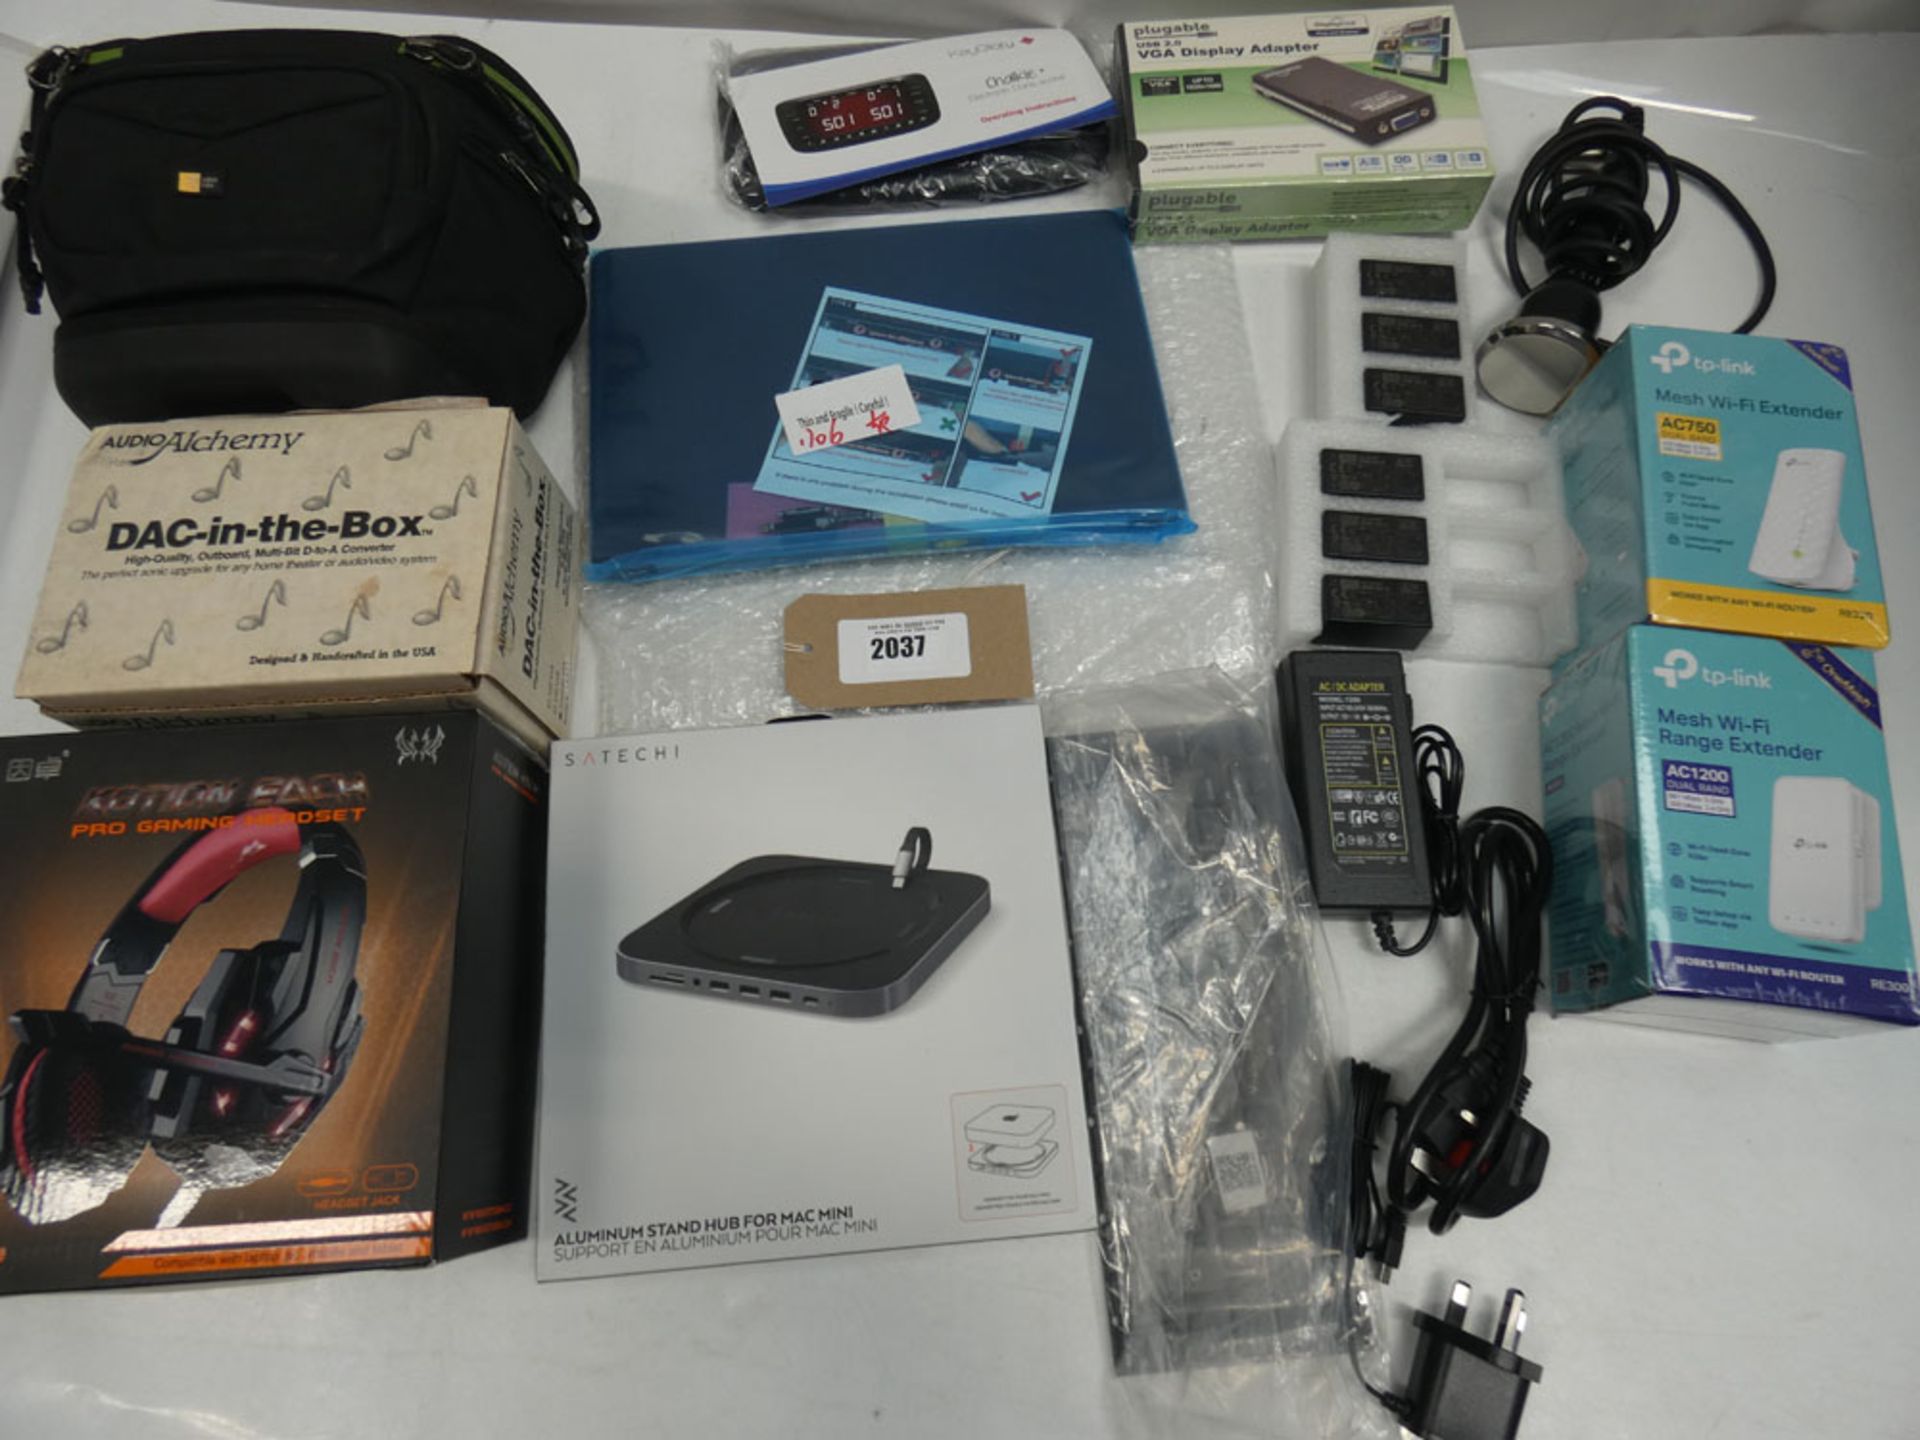 Bag containing various devices and accessories